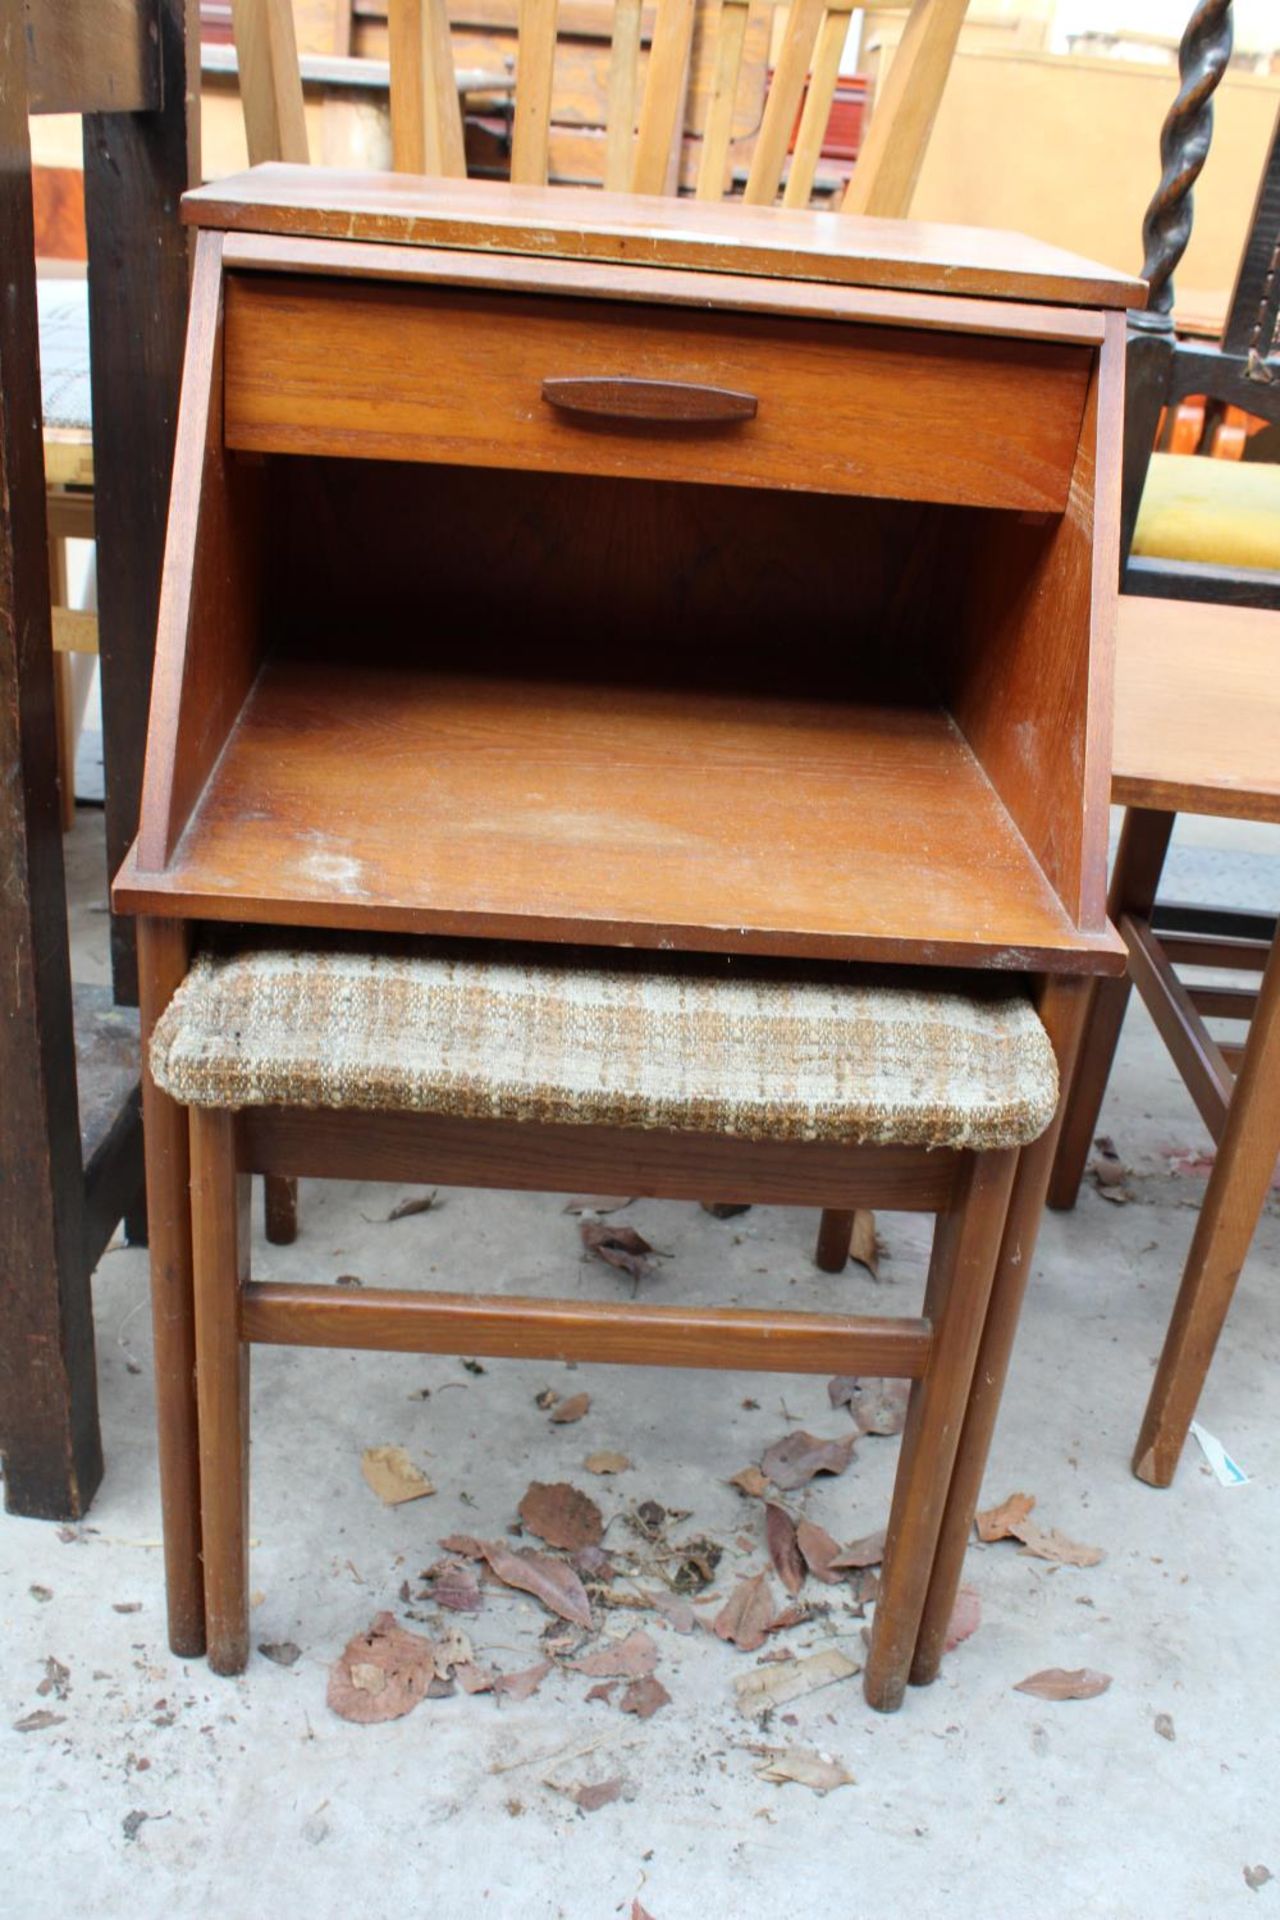 A RETRO TEAK CHIPPY STYLE TELEPHONE TABLE WITH PULL-OUT SEAT, SINGLE DRAWER AND SLIDE - Image 3 of 3